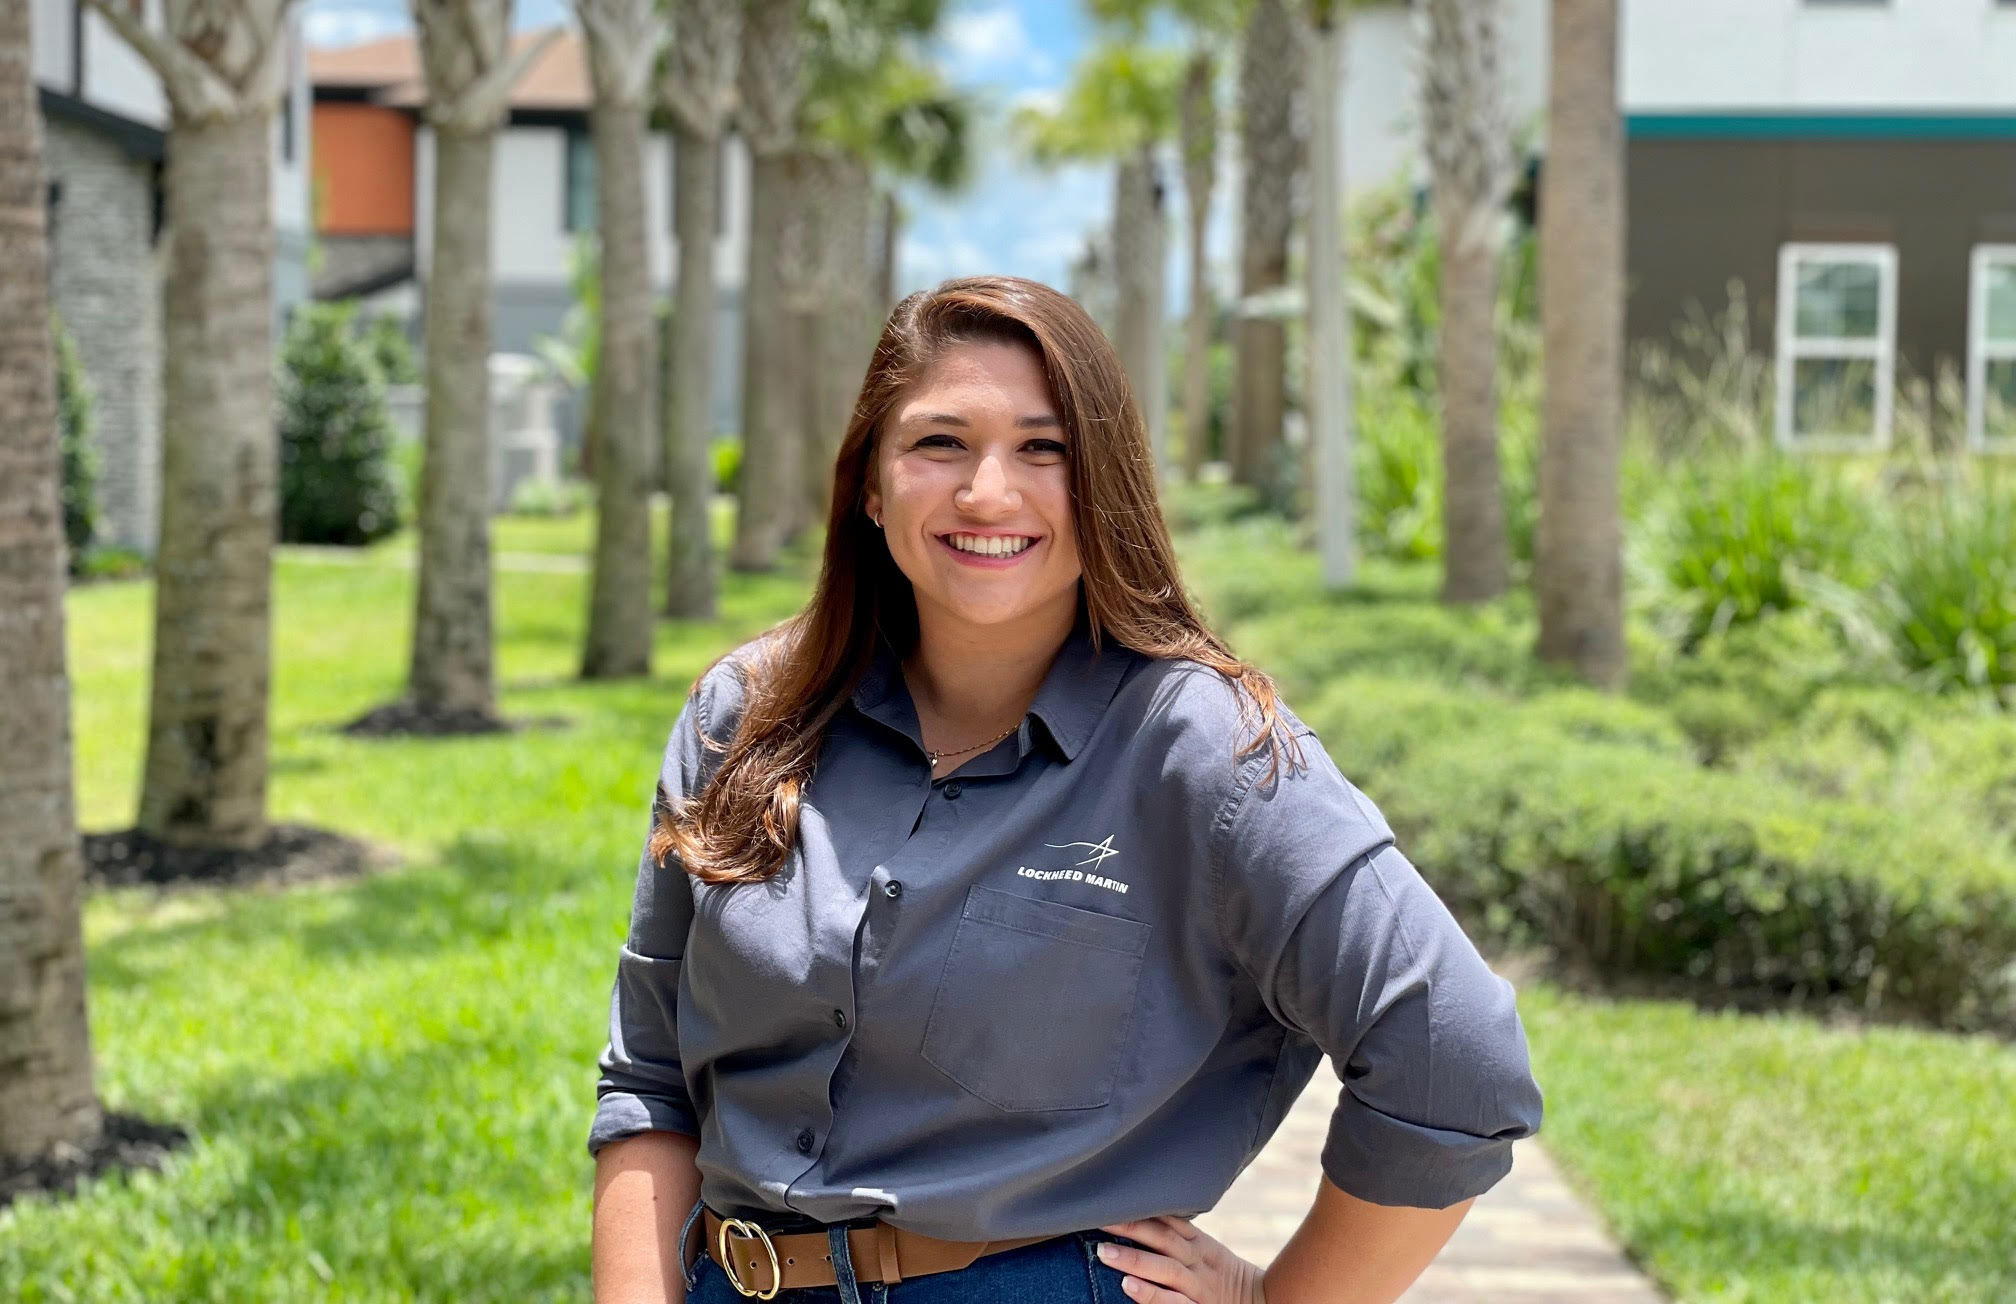 Daniele Mendez ’19 works as a software engineer associate for Lockheed Martin Aeronautics. She received her bachelor’s degree in computer science from Florida Polytechnic University.